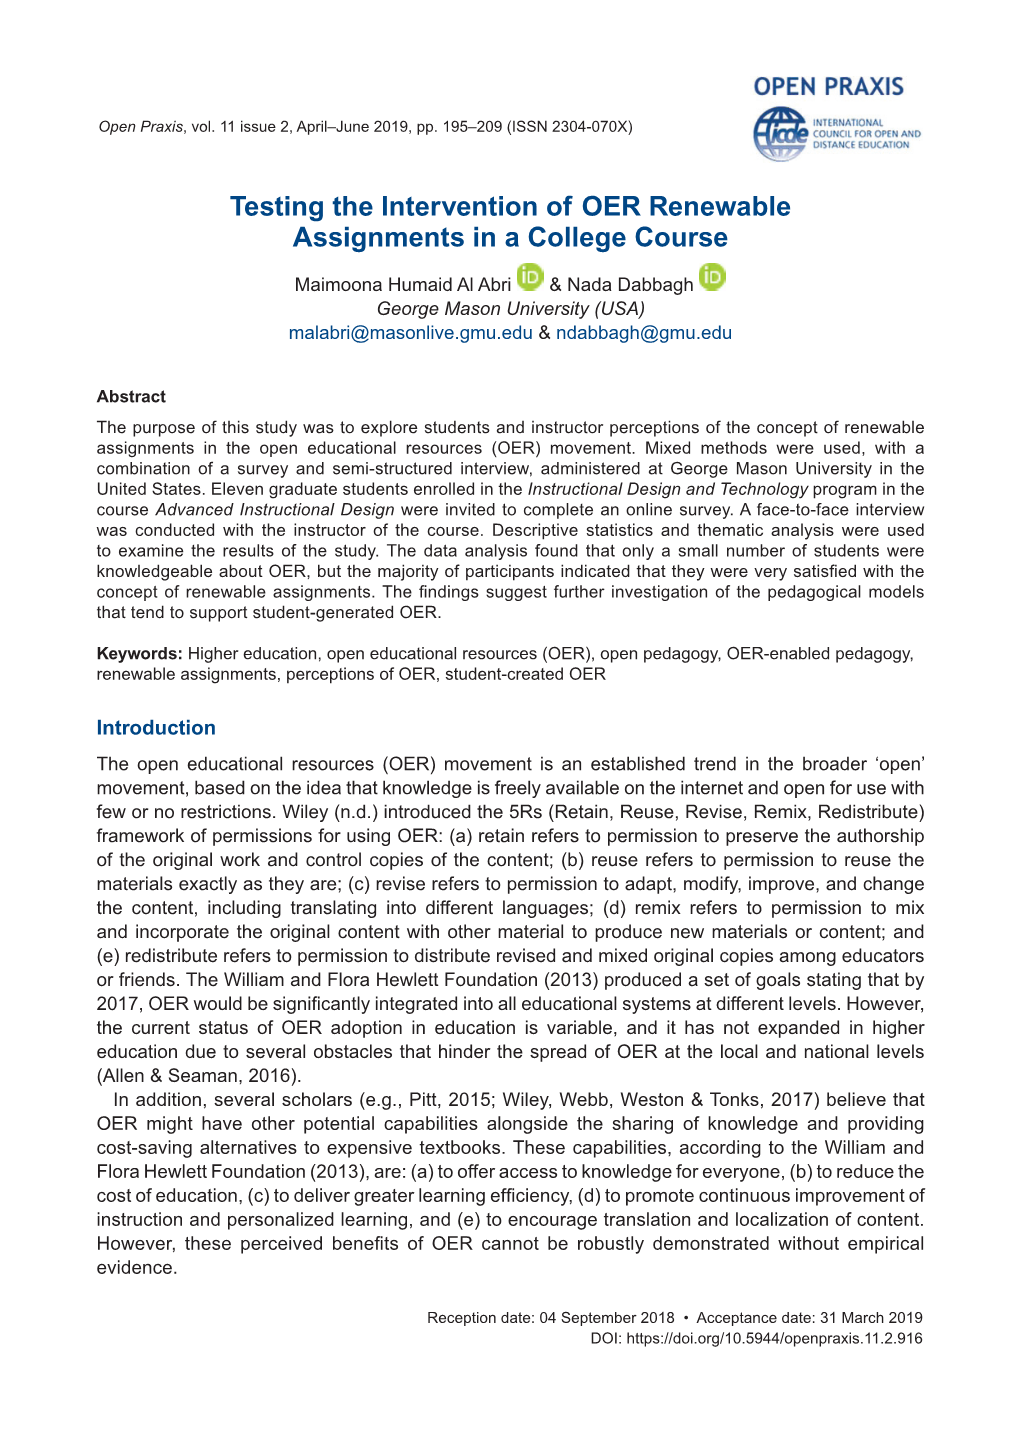 Testing the Intervention of OER Renewable Assignments in a College Course